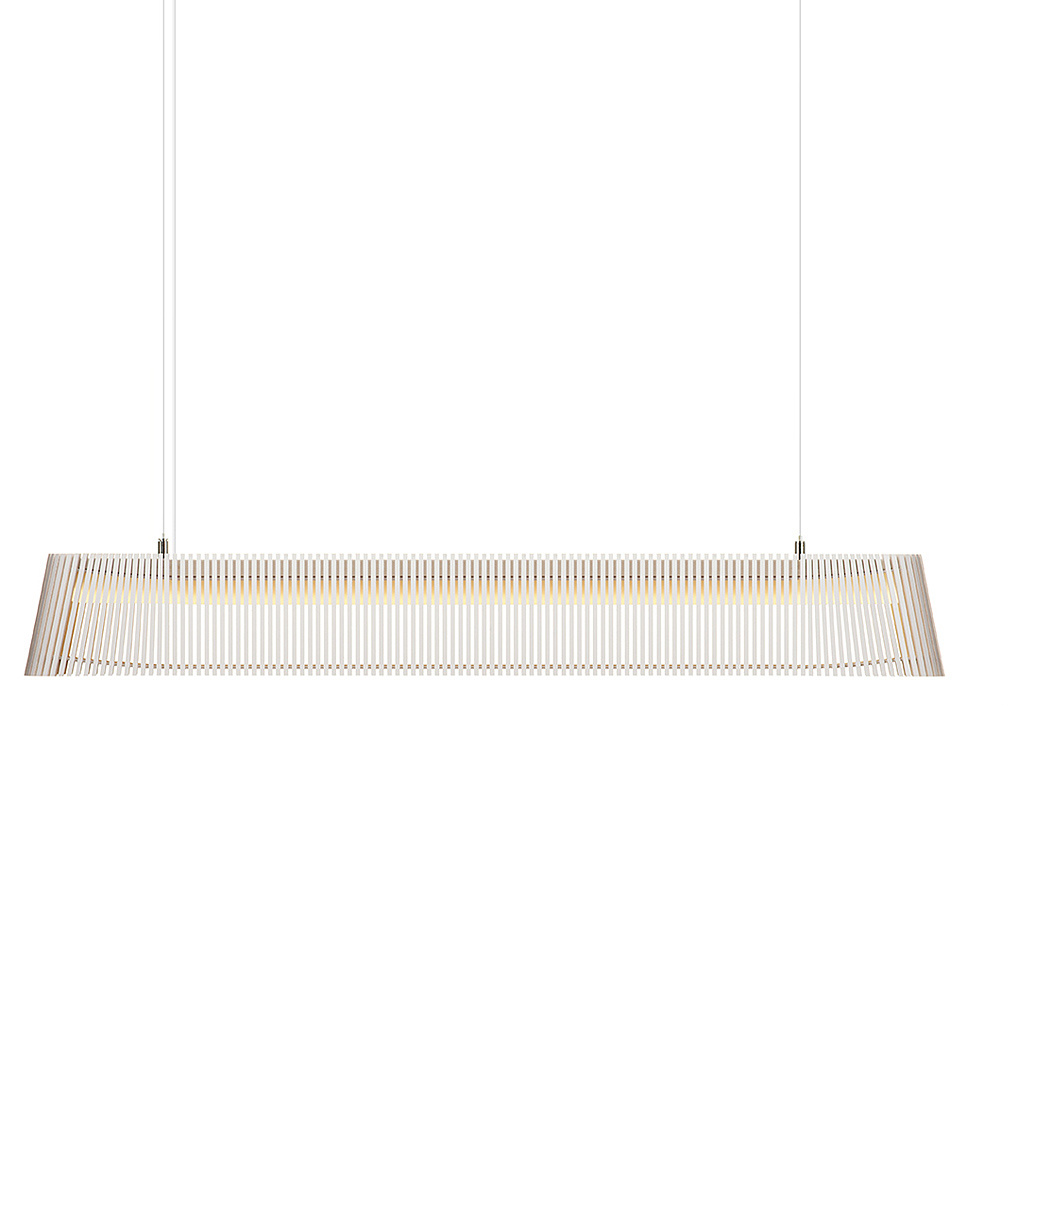 Owalo 7000 pendant lamp is available in white laminated